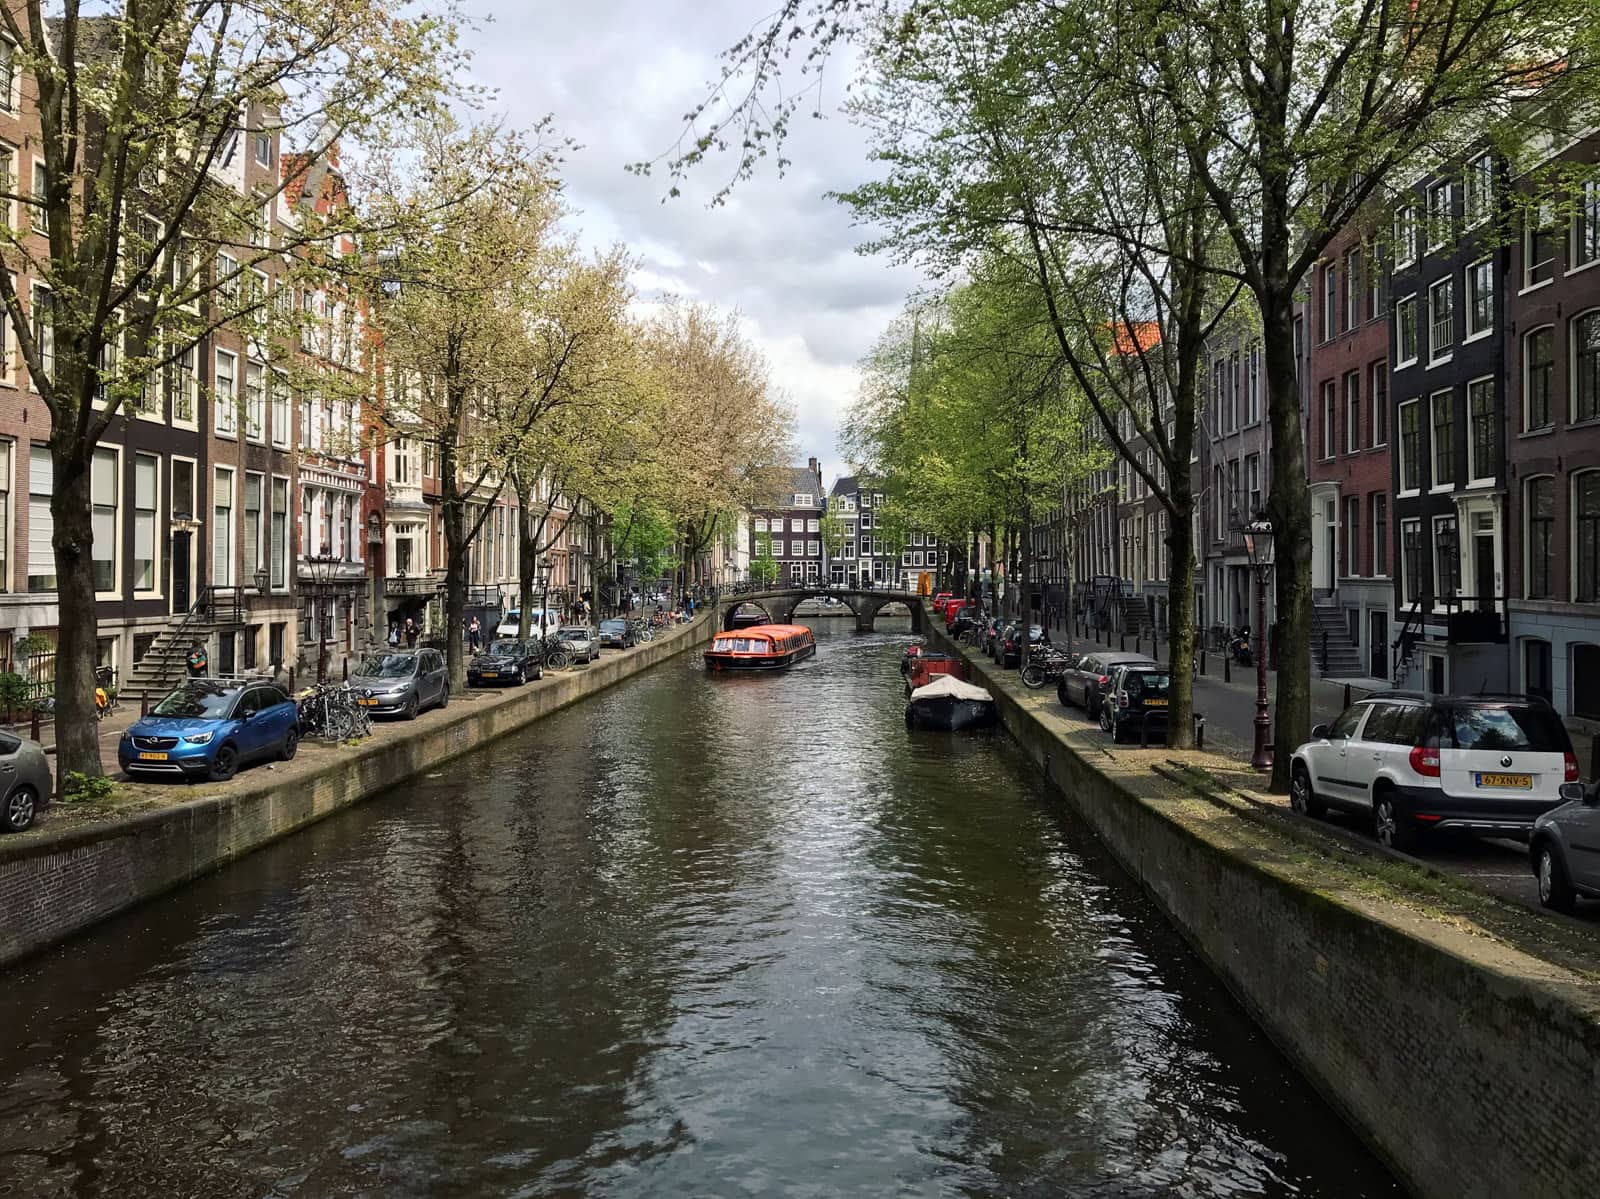 A view of a canal in Amsterdam, seen from a perpendicular bridge. There are a couple of canal boats and there are some trees visible in frame